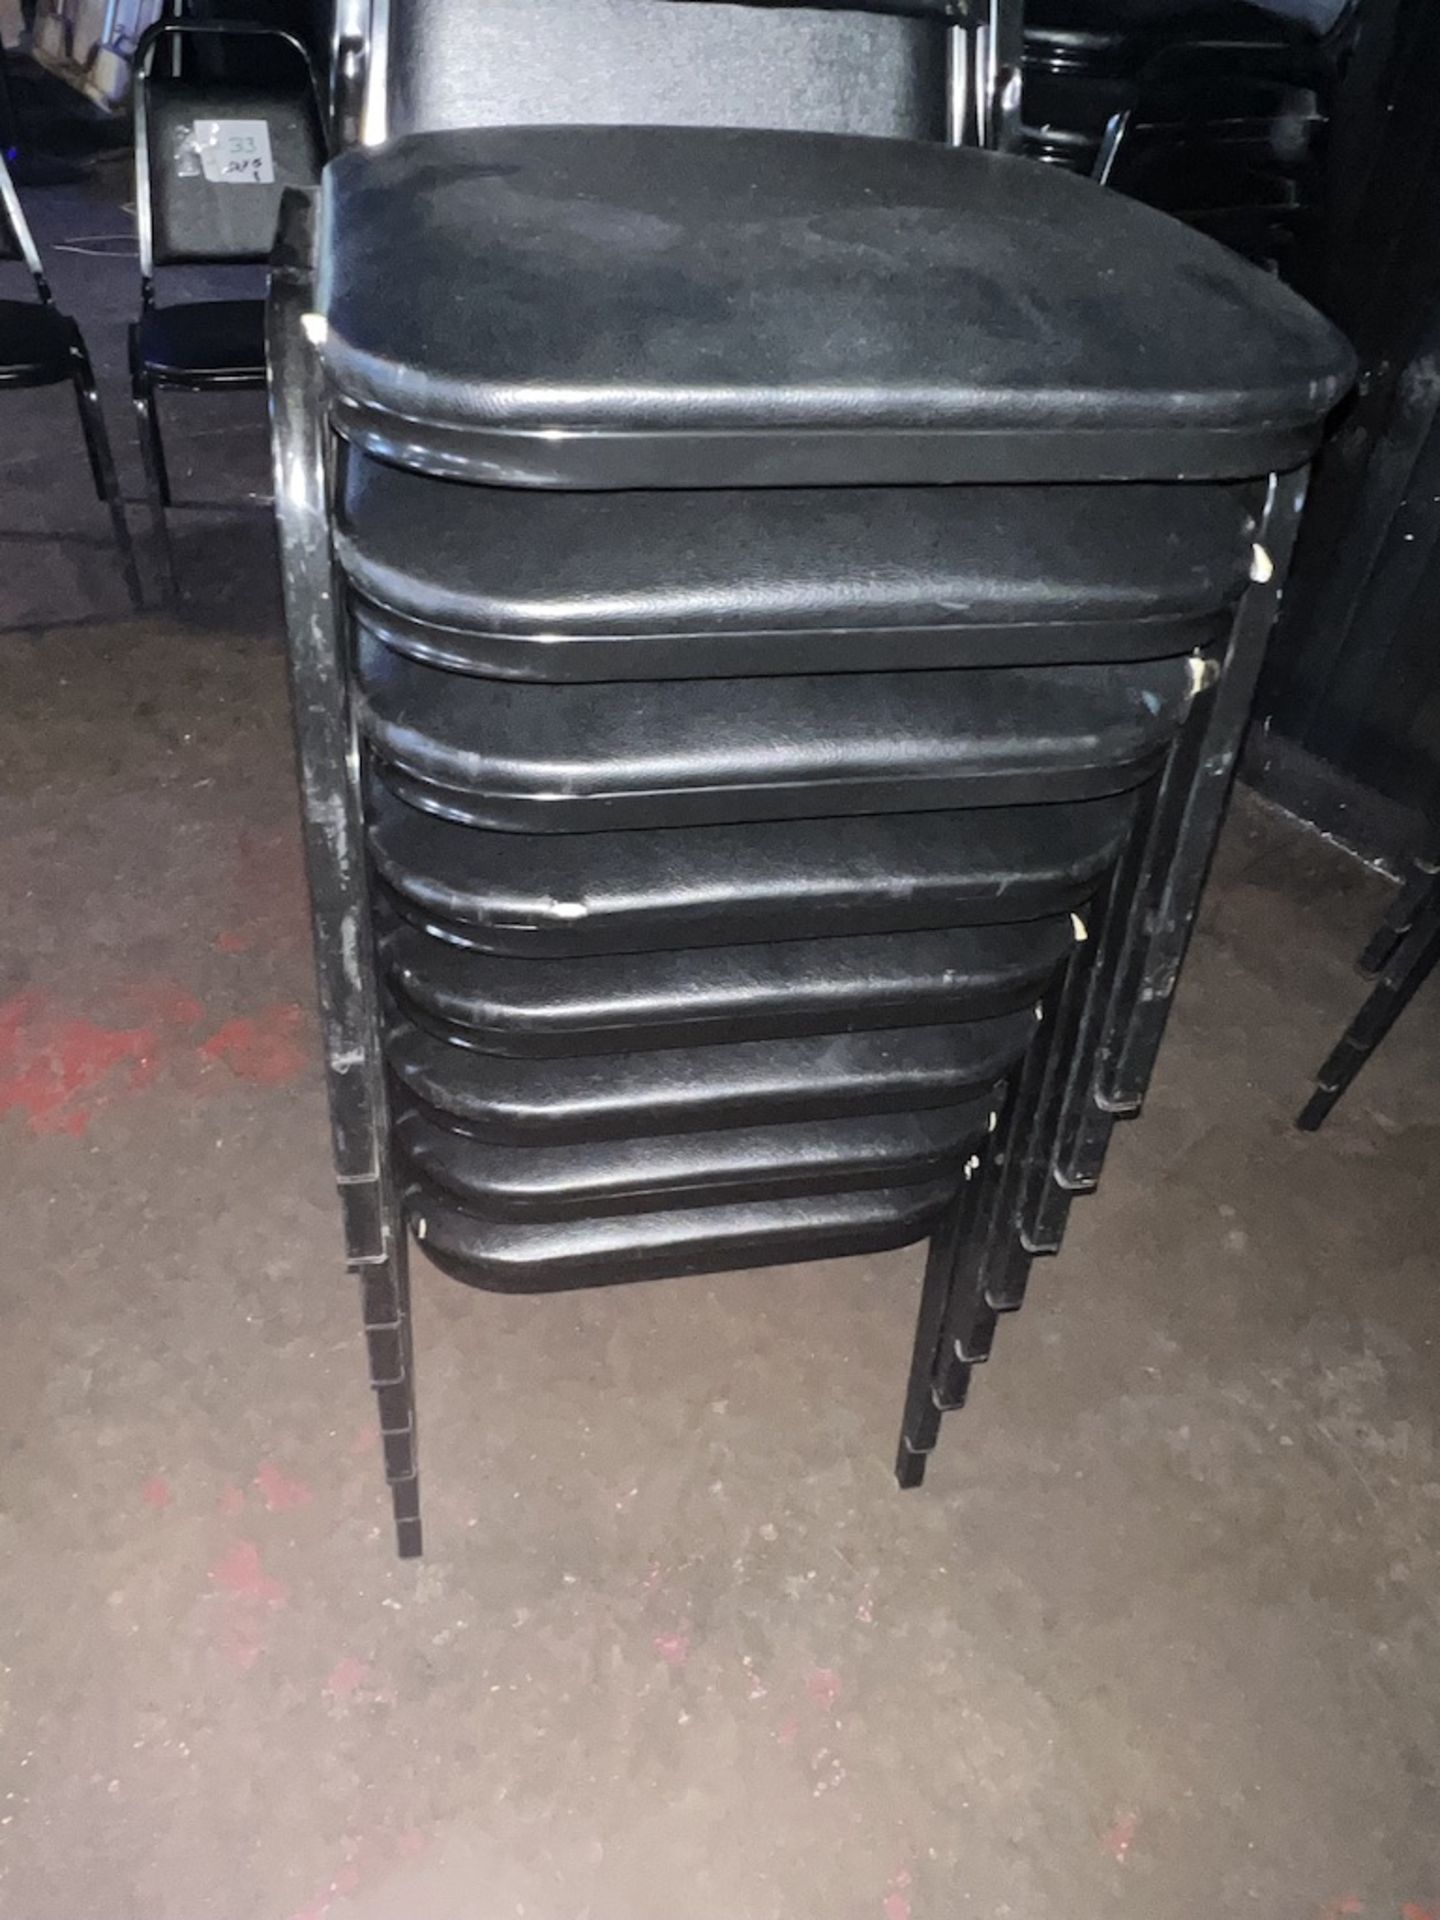 LOT OF: (8) METAL CHAIRS W/ PADDED SEATS AND BACKRESTS - Image 3 of 3